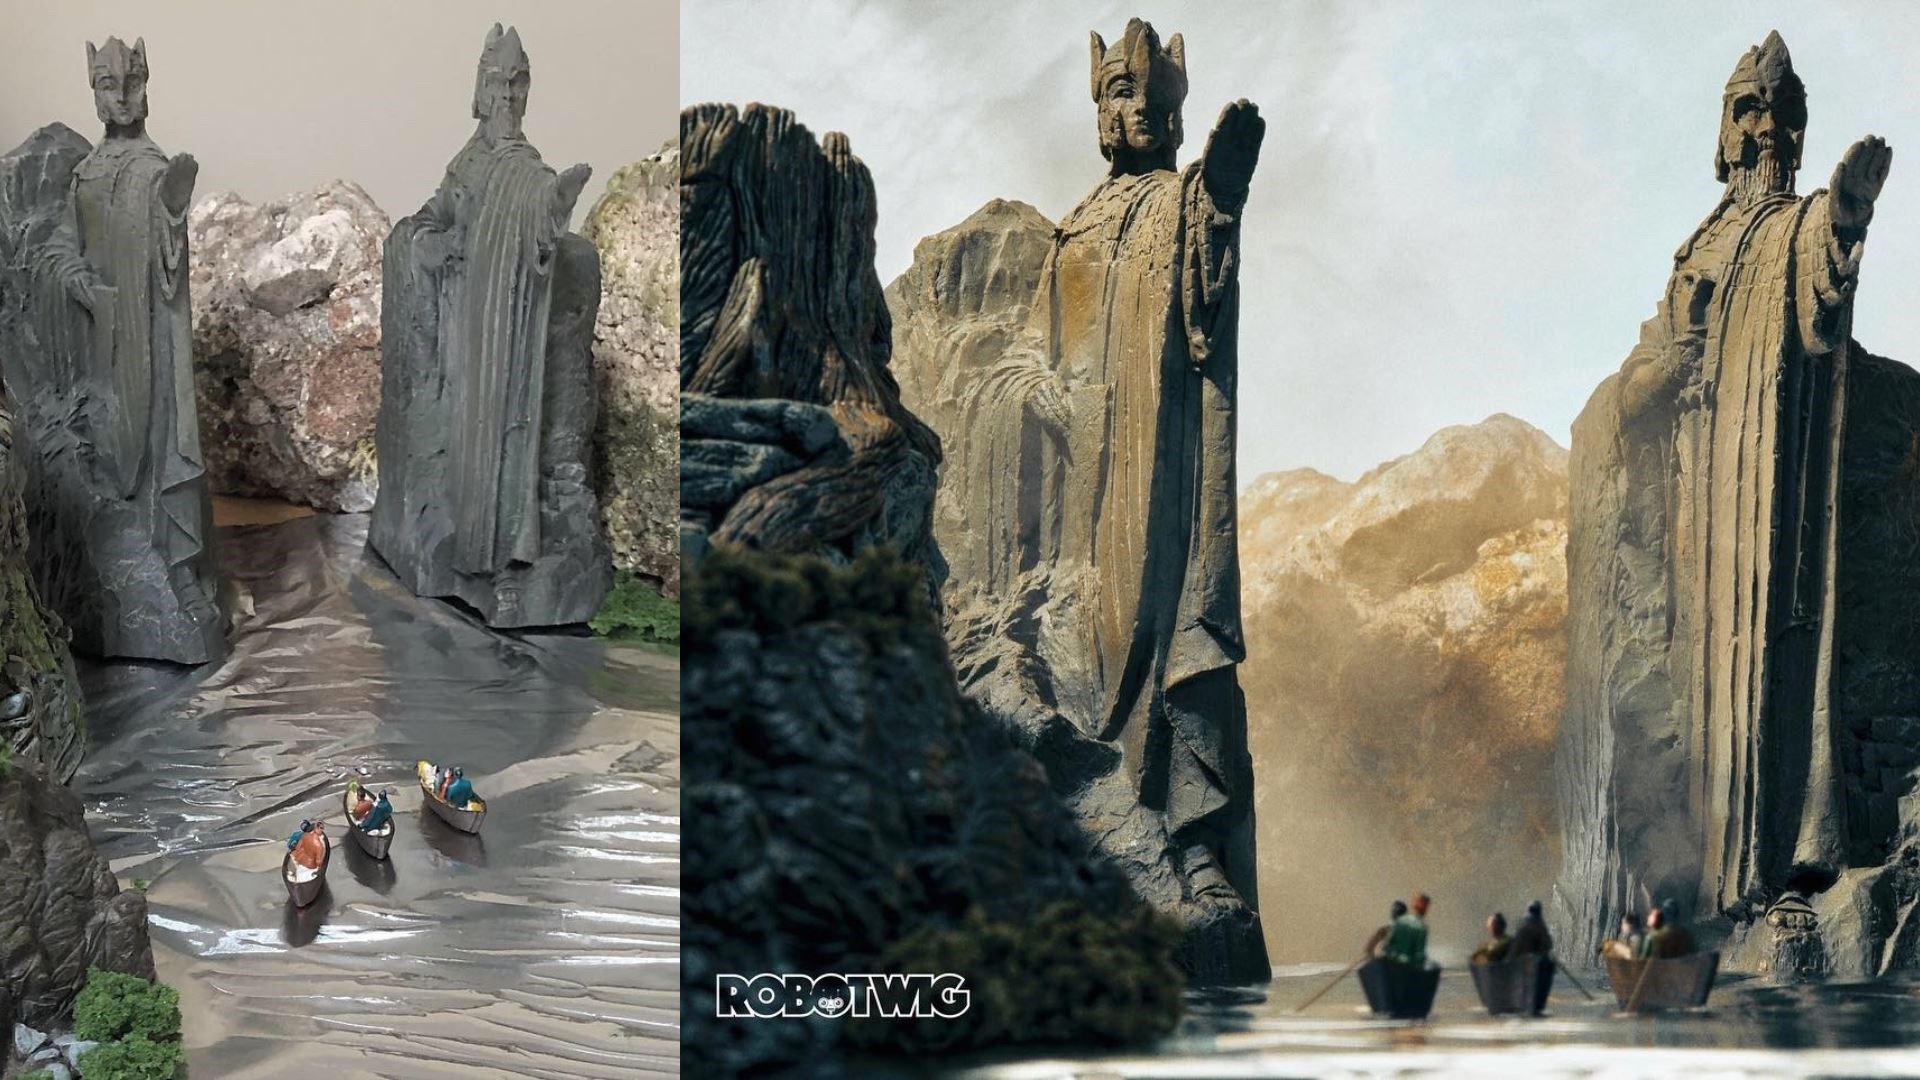 Steve Berry’s Lord Of The Rings – a behind-the-scenes shot and the finished product (Robot Wig/PA)